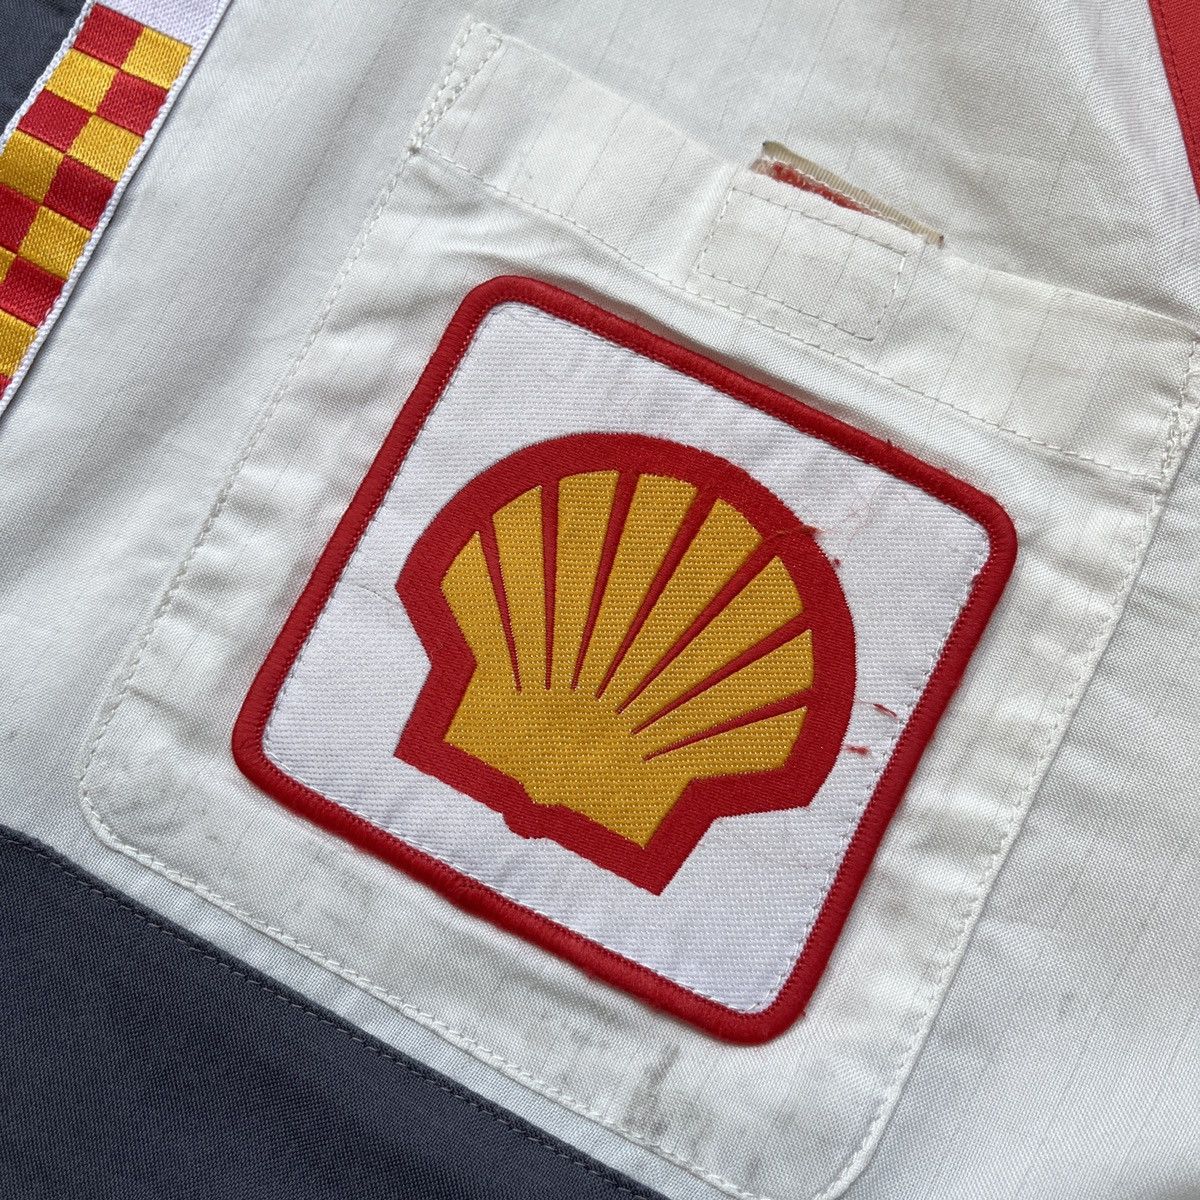 Shell Uniform Workers Vintage Japanese Outlet 1990s - 7